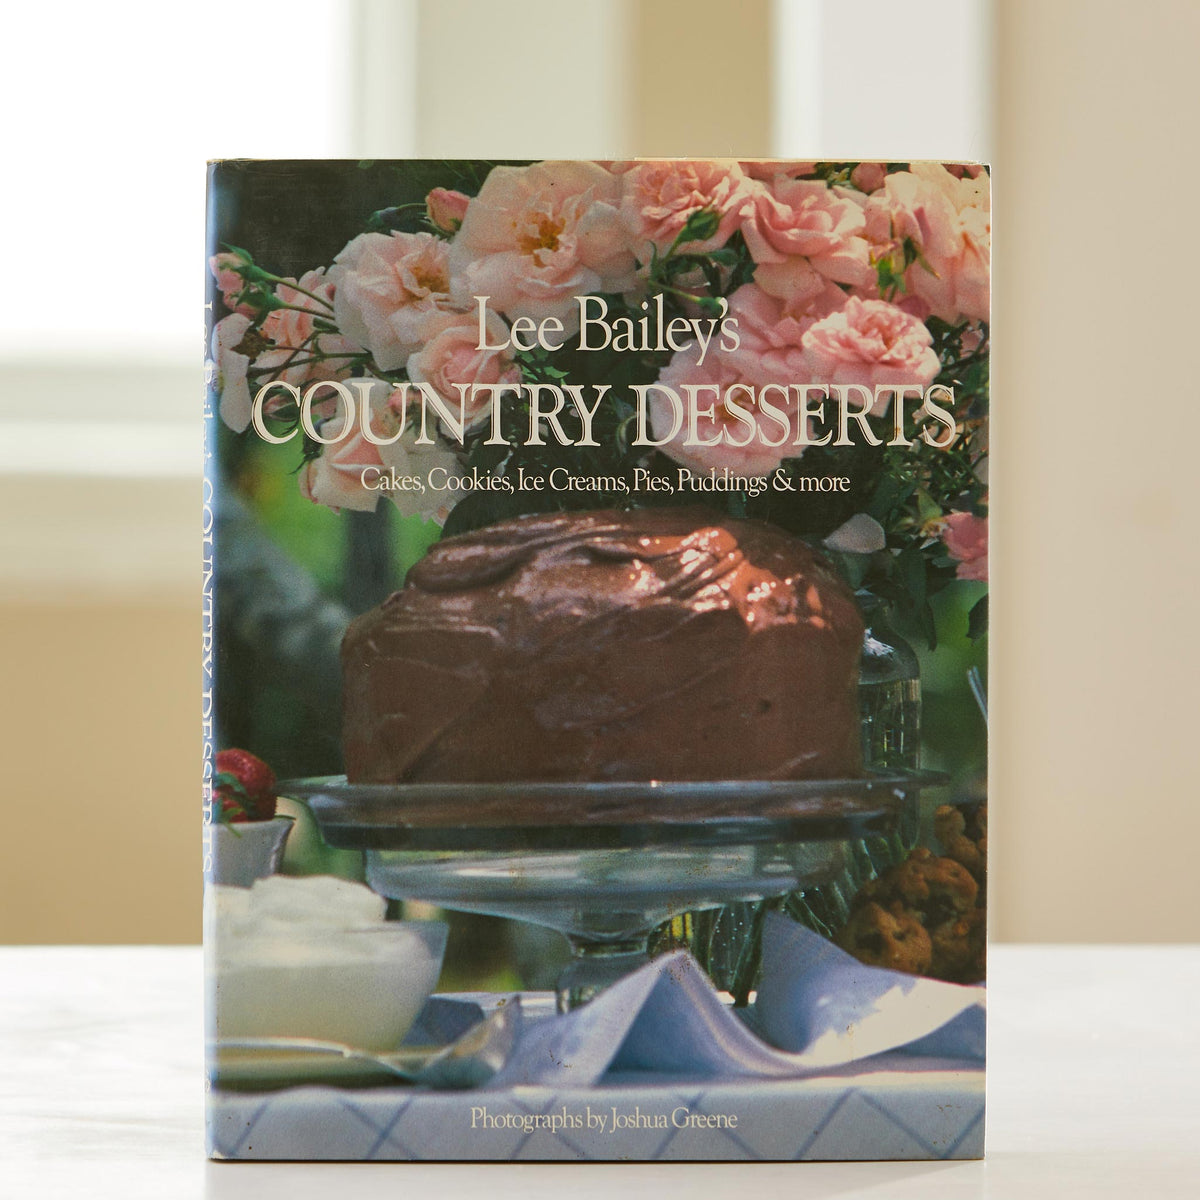 Lee Bailey’s County Desserts. Cakes, cookies, Ice Creams, Pies, Cobblers, need we keep going? Find your best country kitchen dessert dreams here.